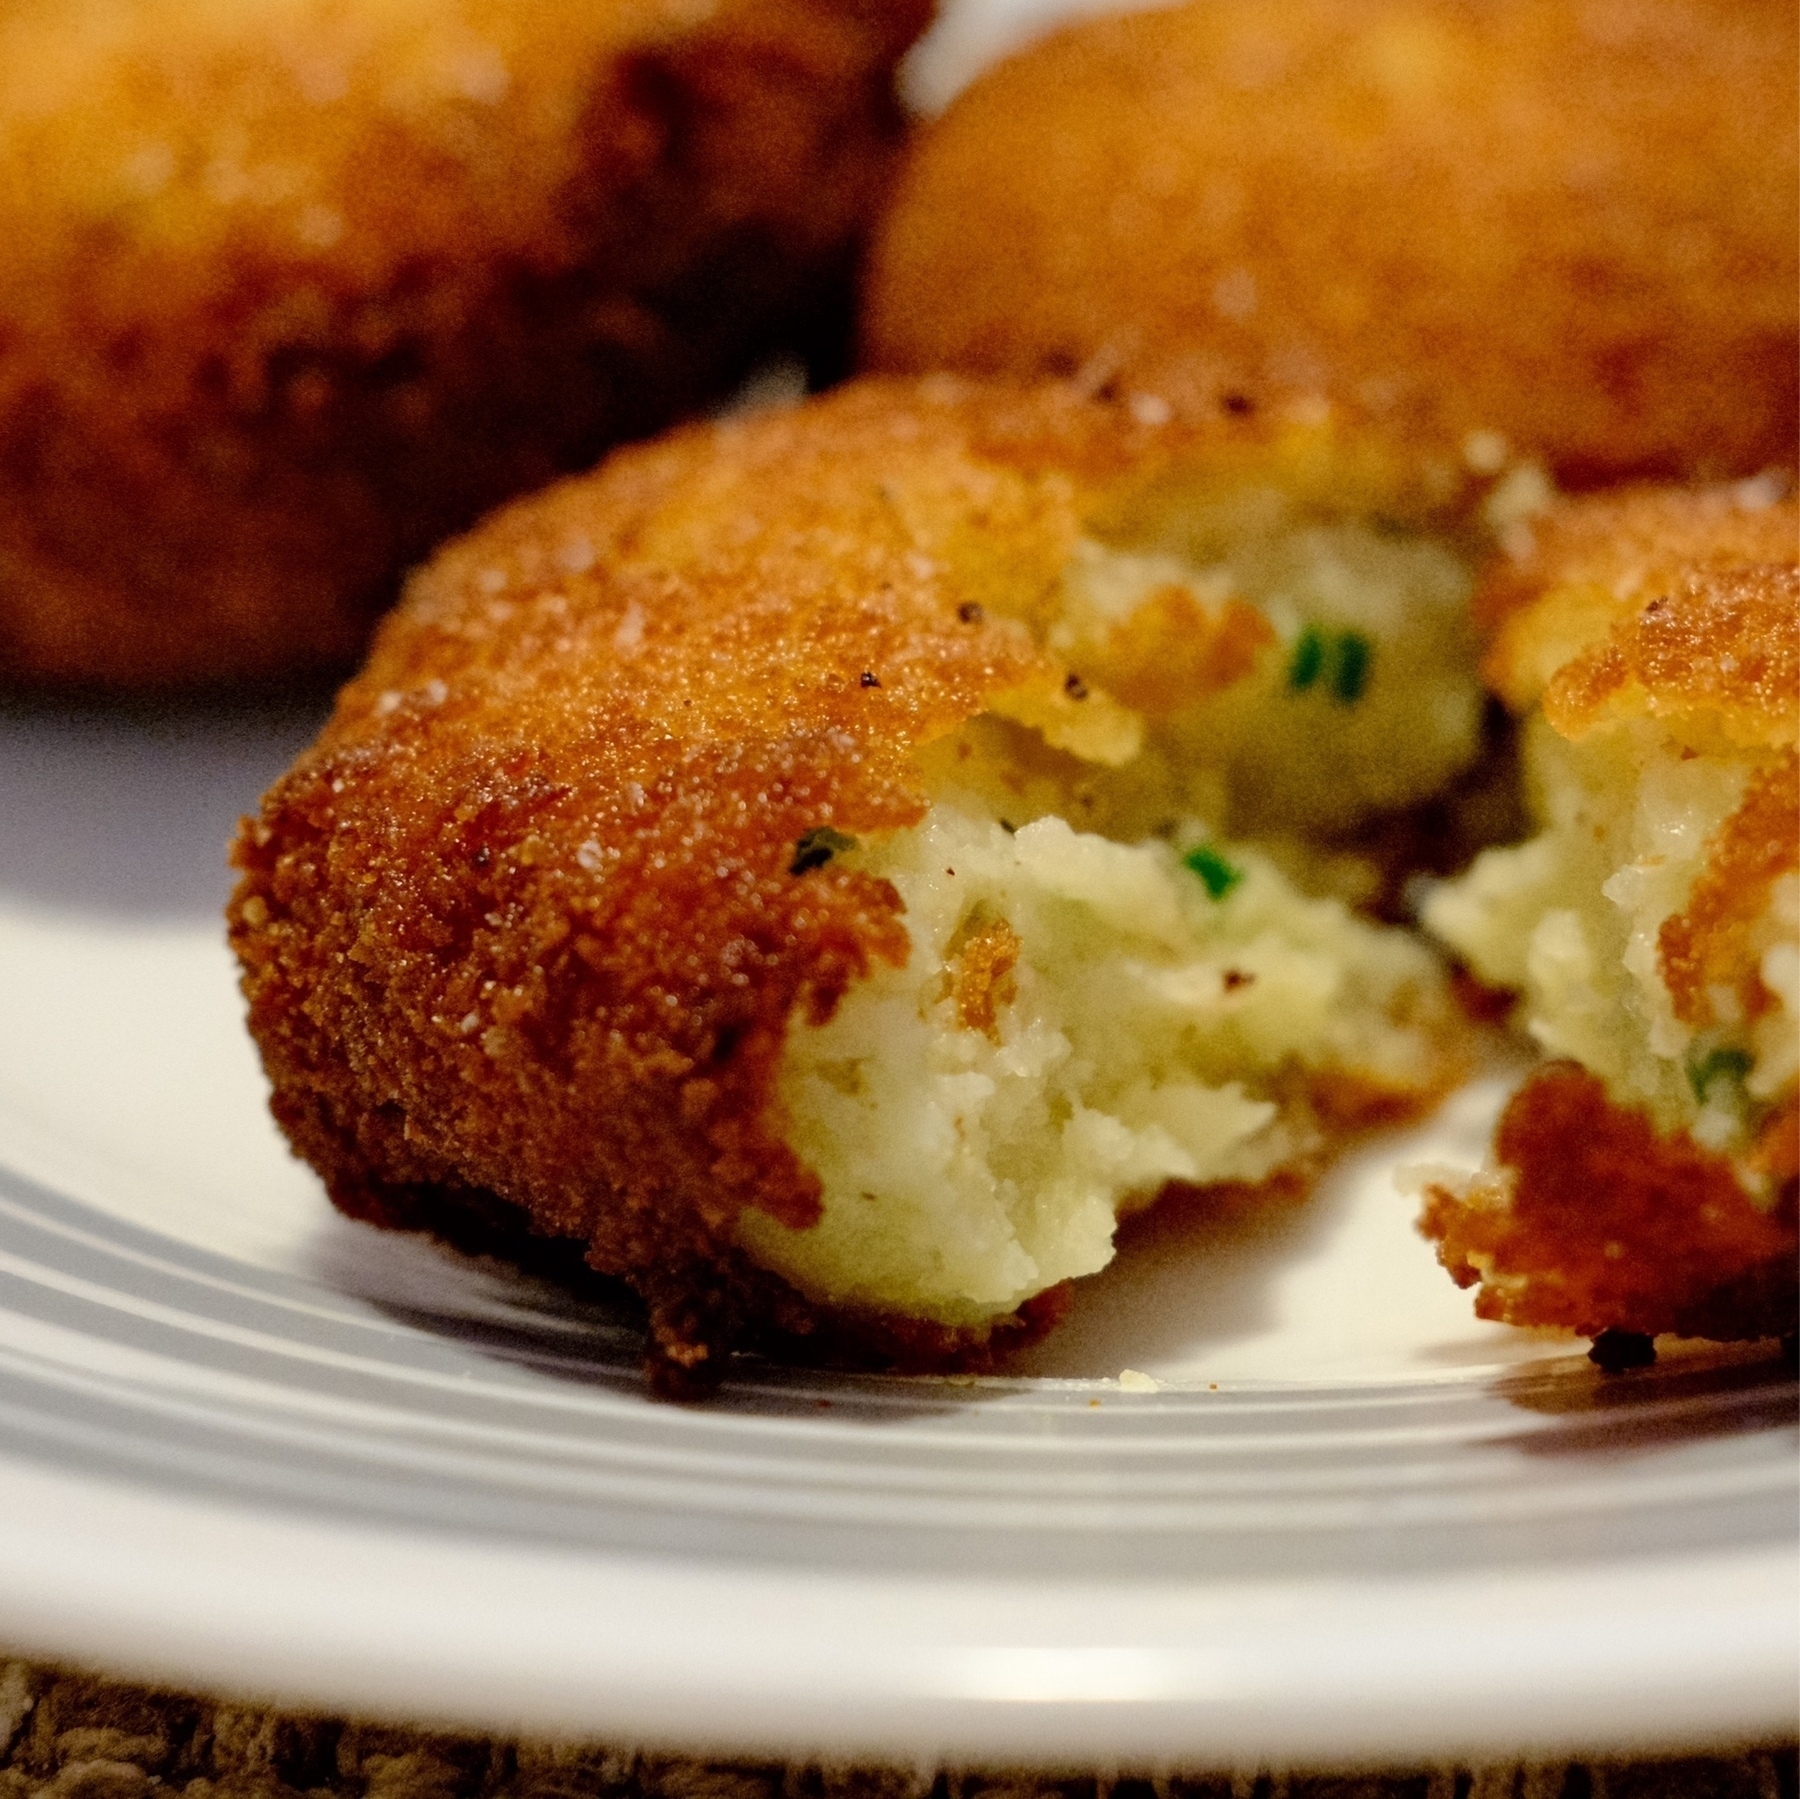 plated golden brown croquettes with one cut open, revealing fluffy white potatoes and chives